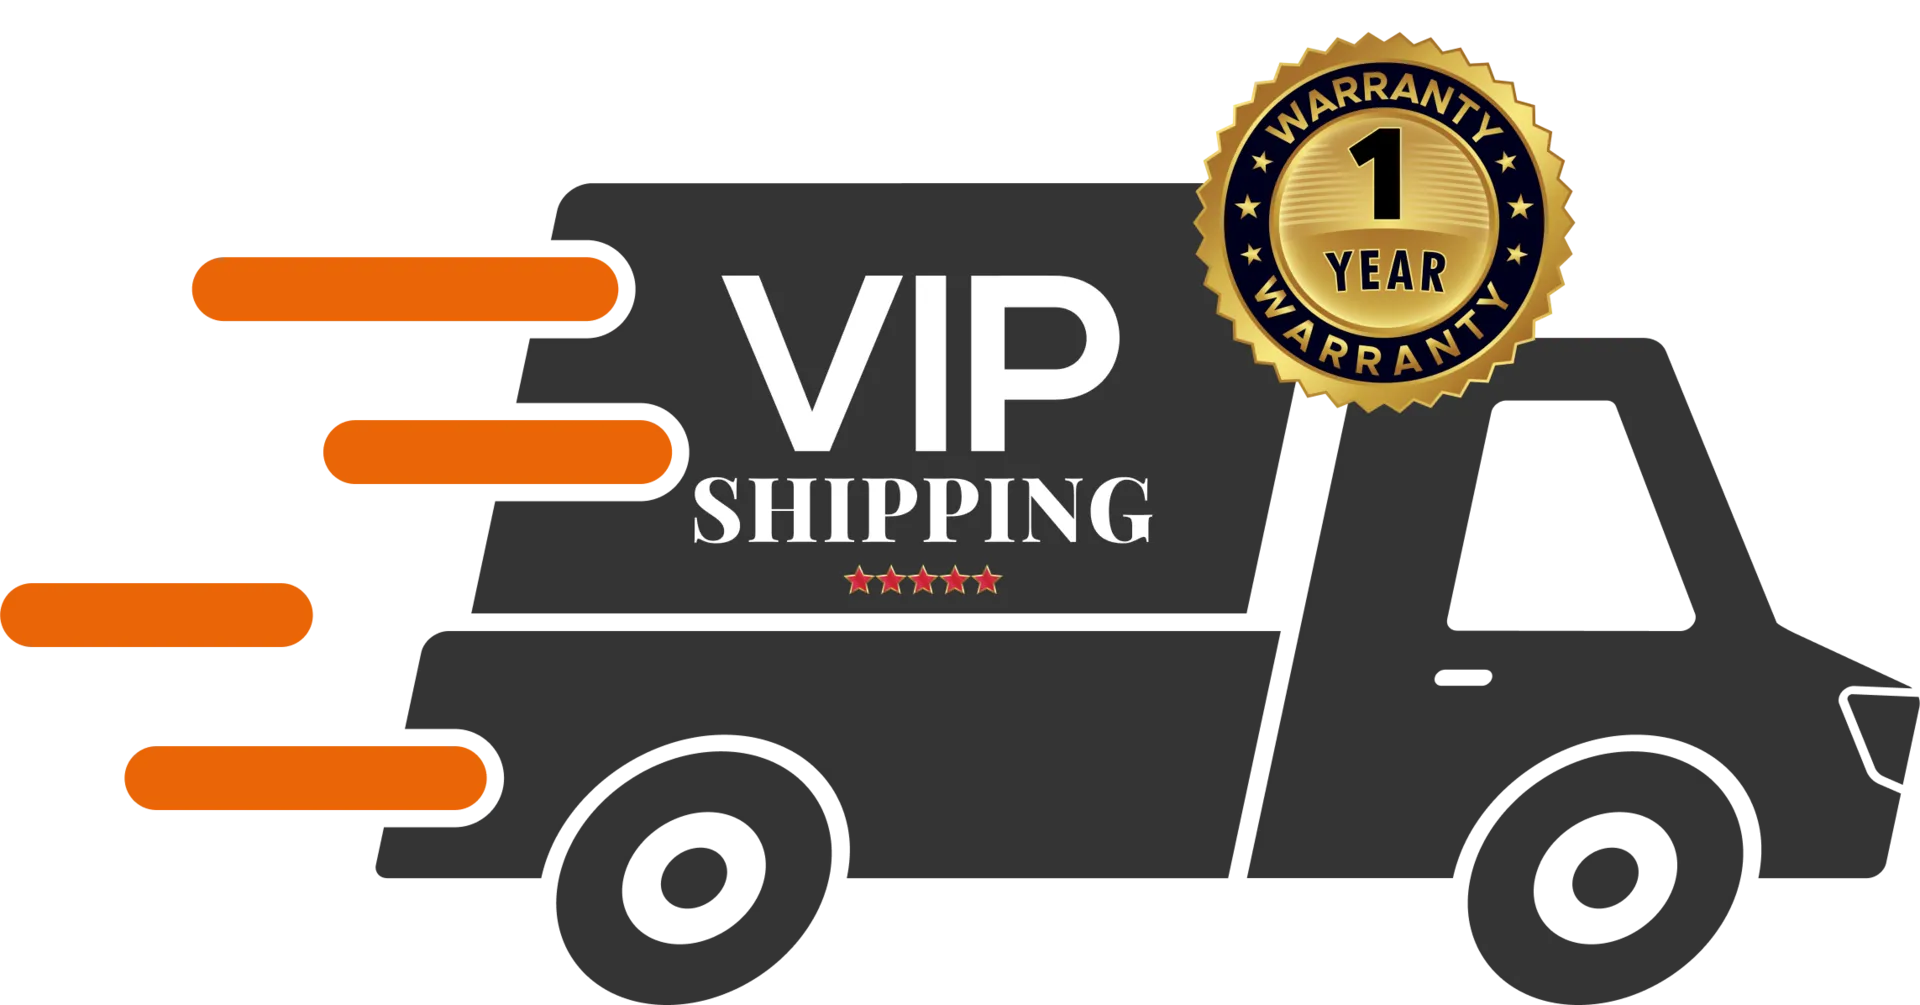 VIP shipping + 1-year Product Warranty